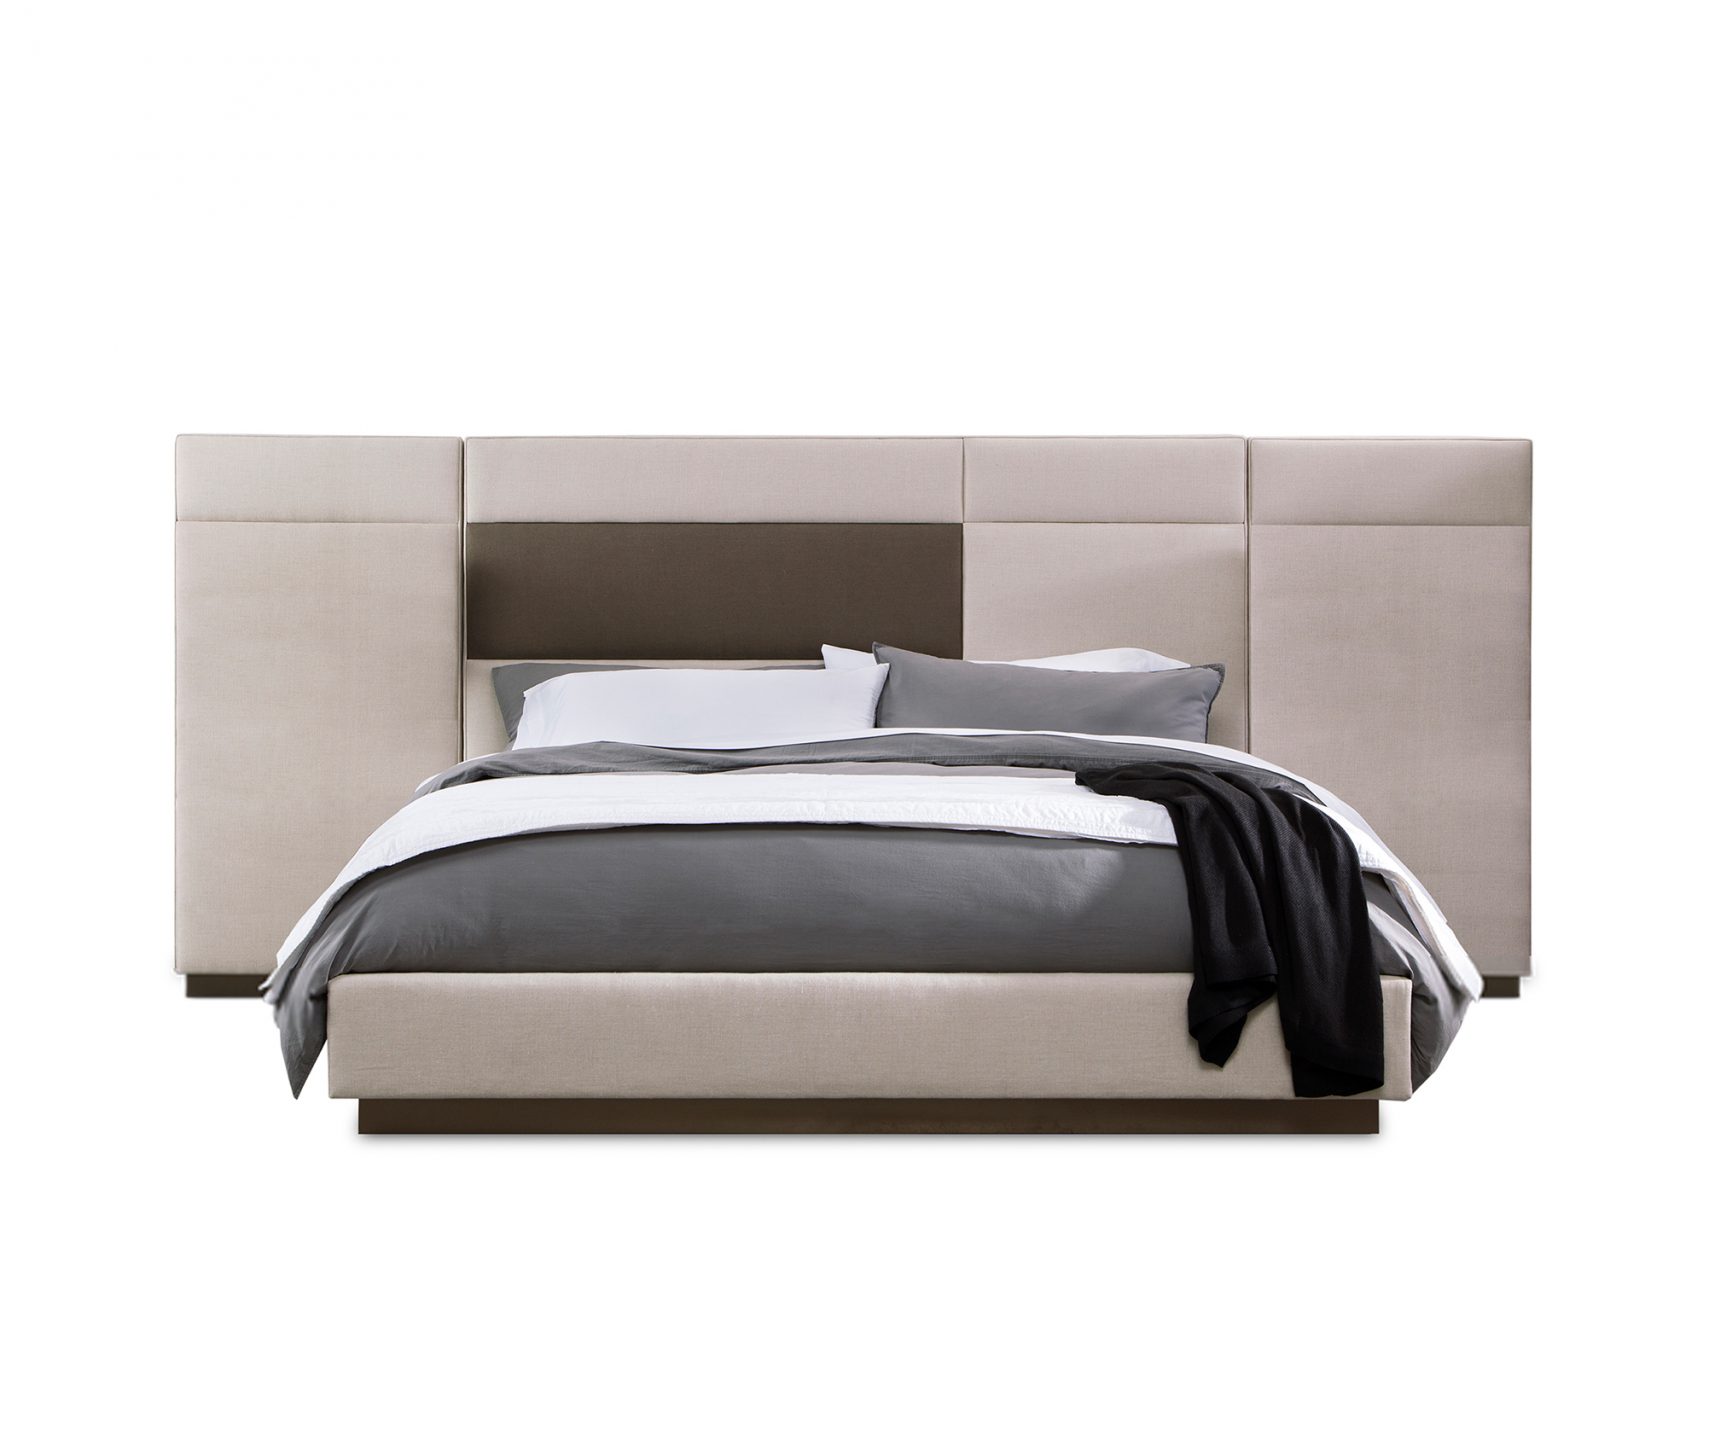 Interlude Home_Quadrant Bed with Side Panels_int_products